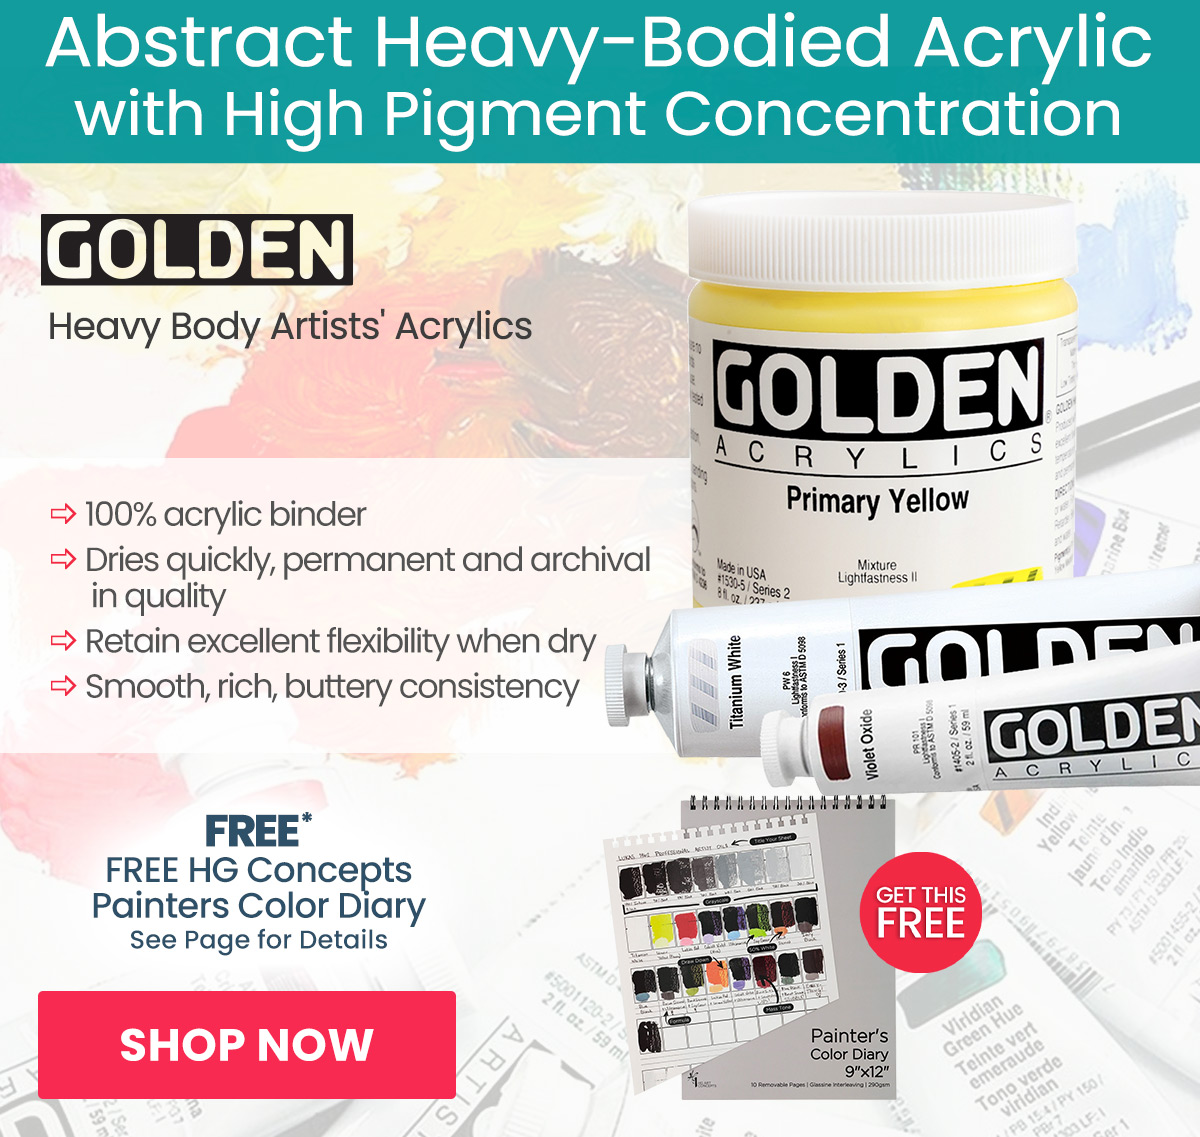 Free ift with Purchase - Golden Heavy Body Acrylics